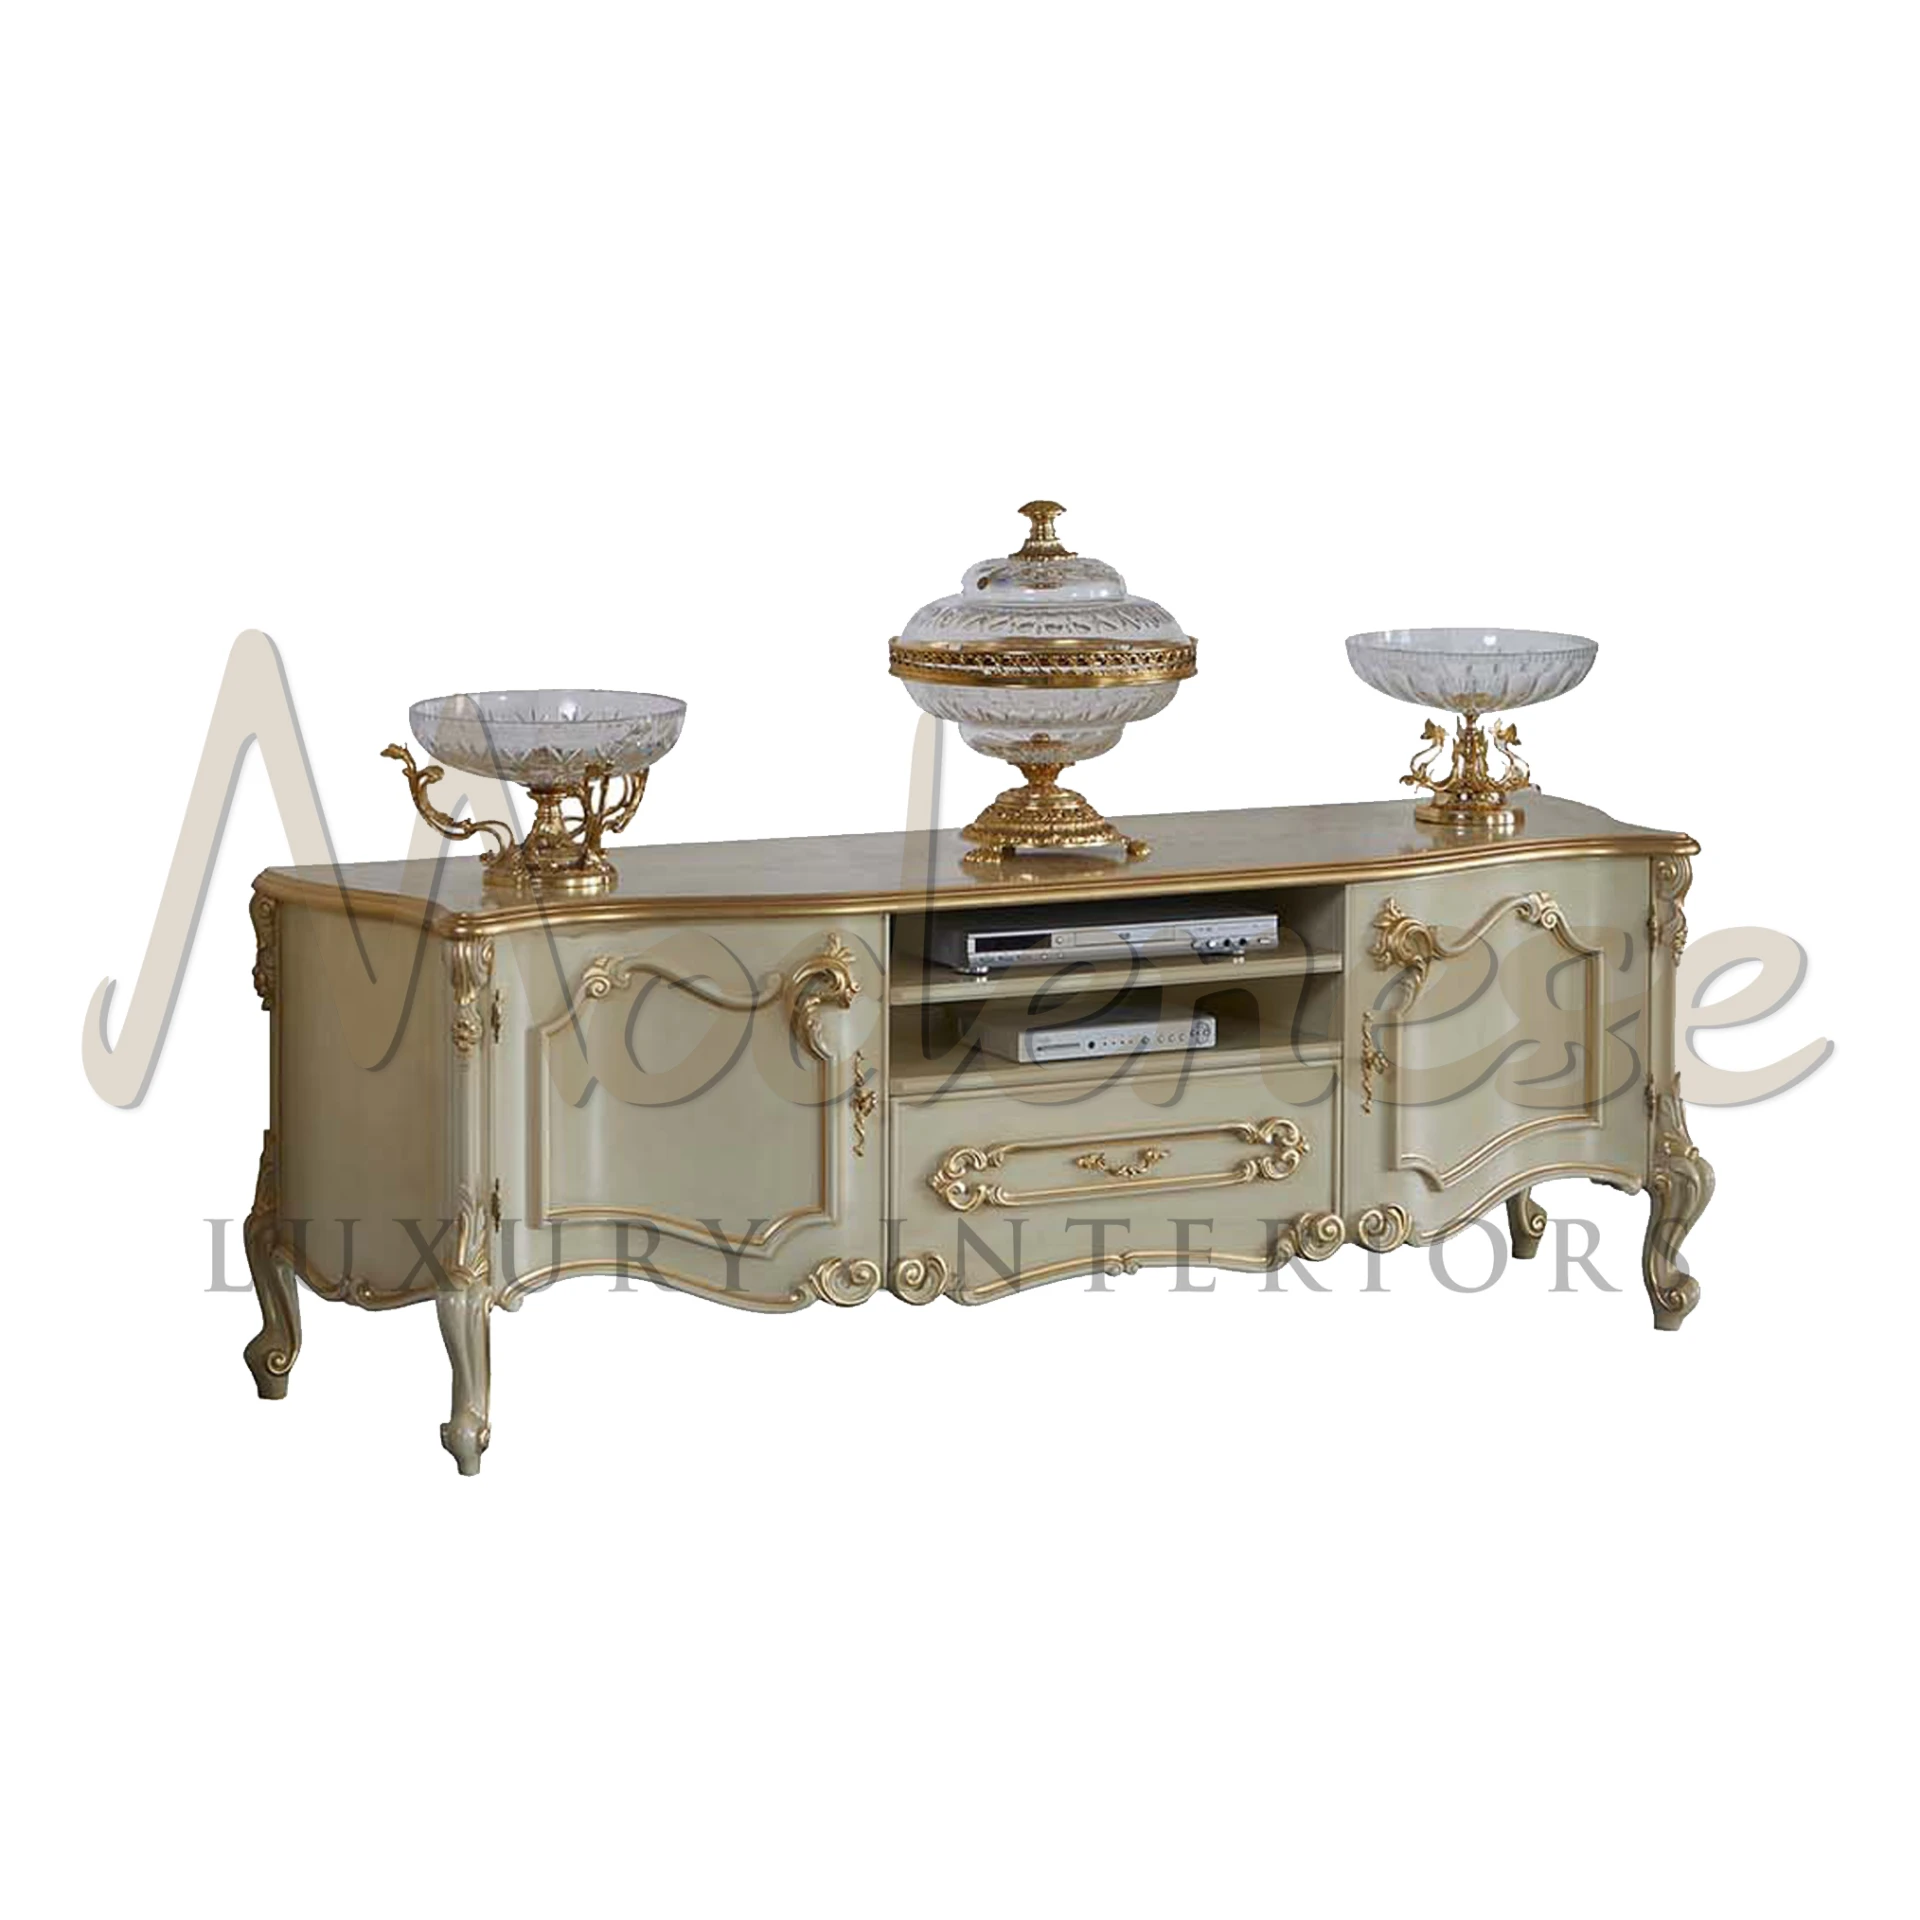 Italian Victorian Style TV Stand, classic elegance for luxury interiors, optional decorative accents available.
